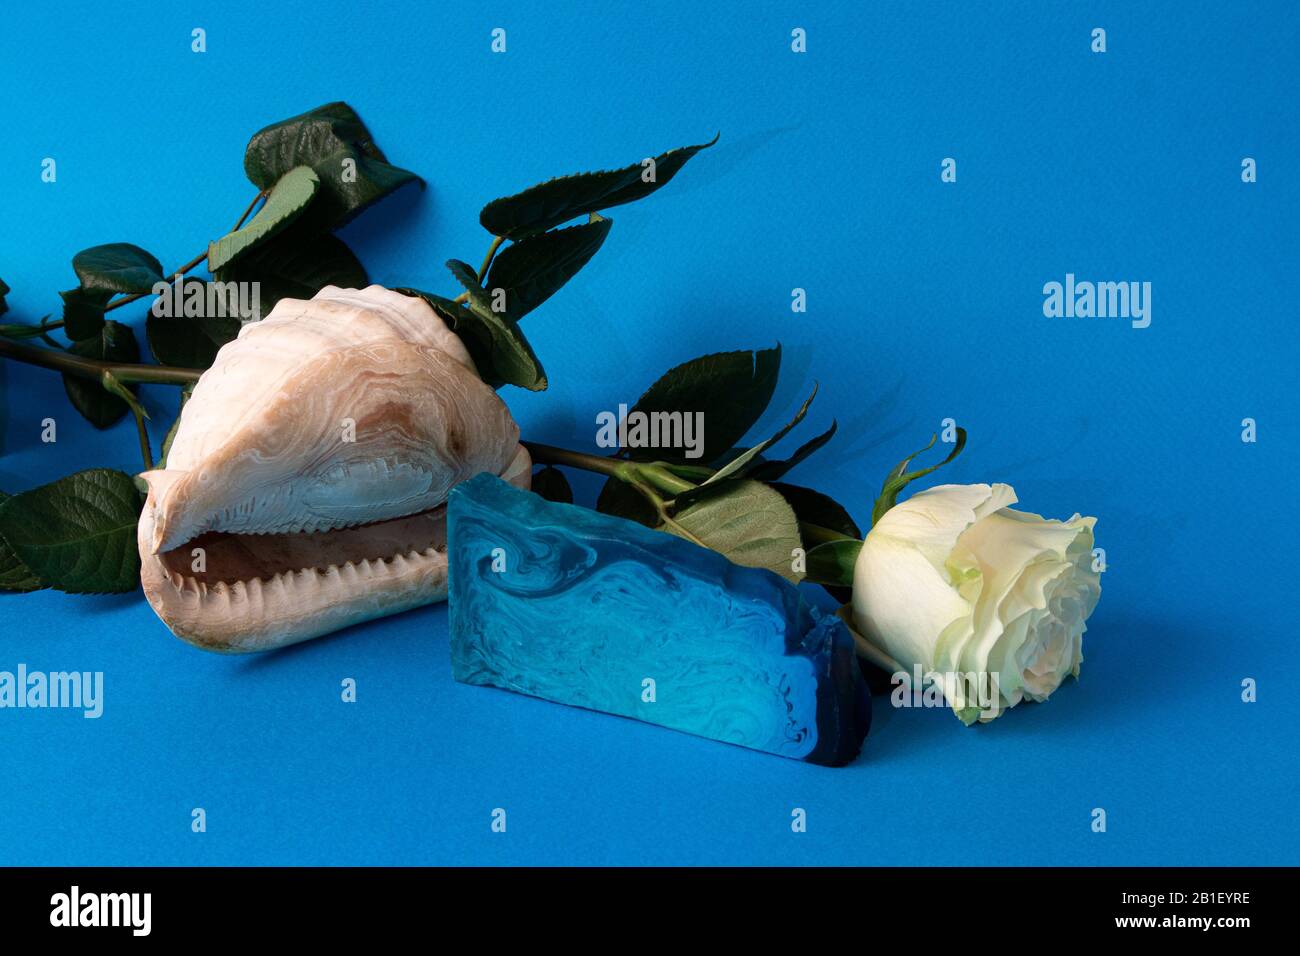 Still life with piece of blue mint handmade soap, big shell and white rose against bright blue background Stock Photo